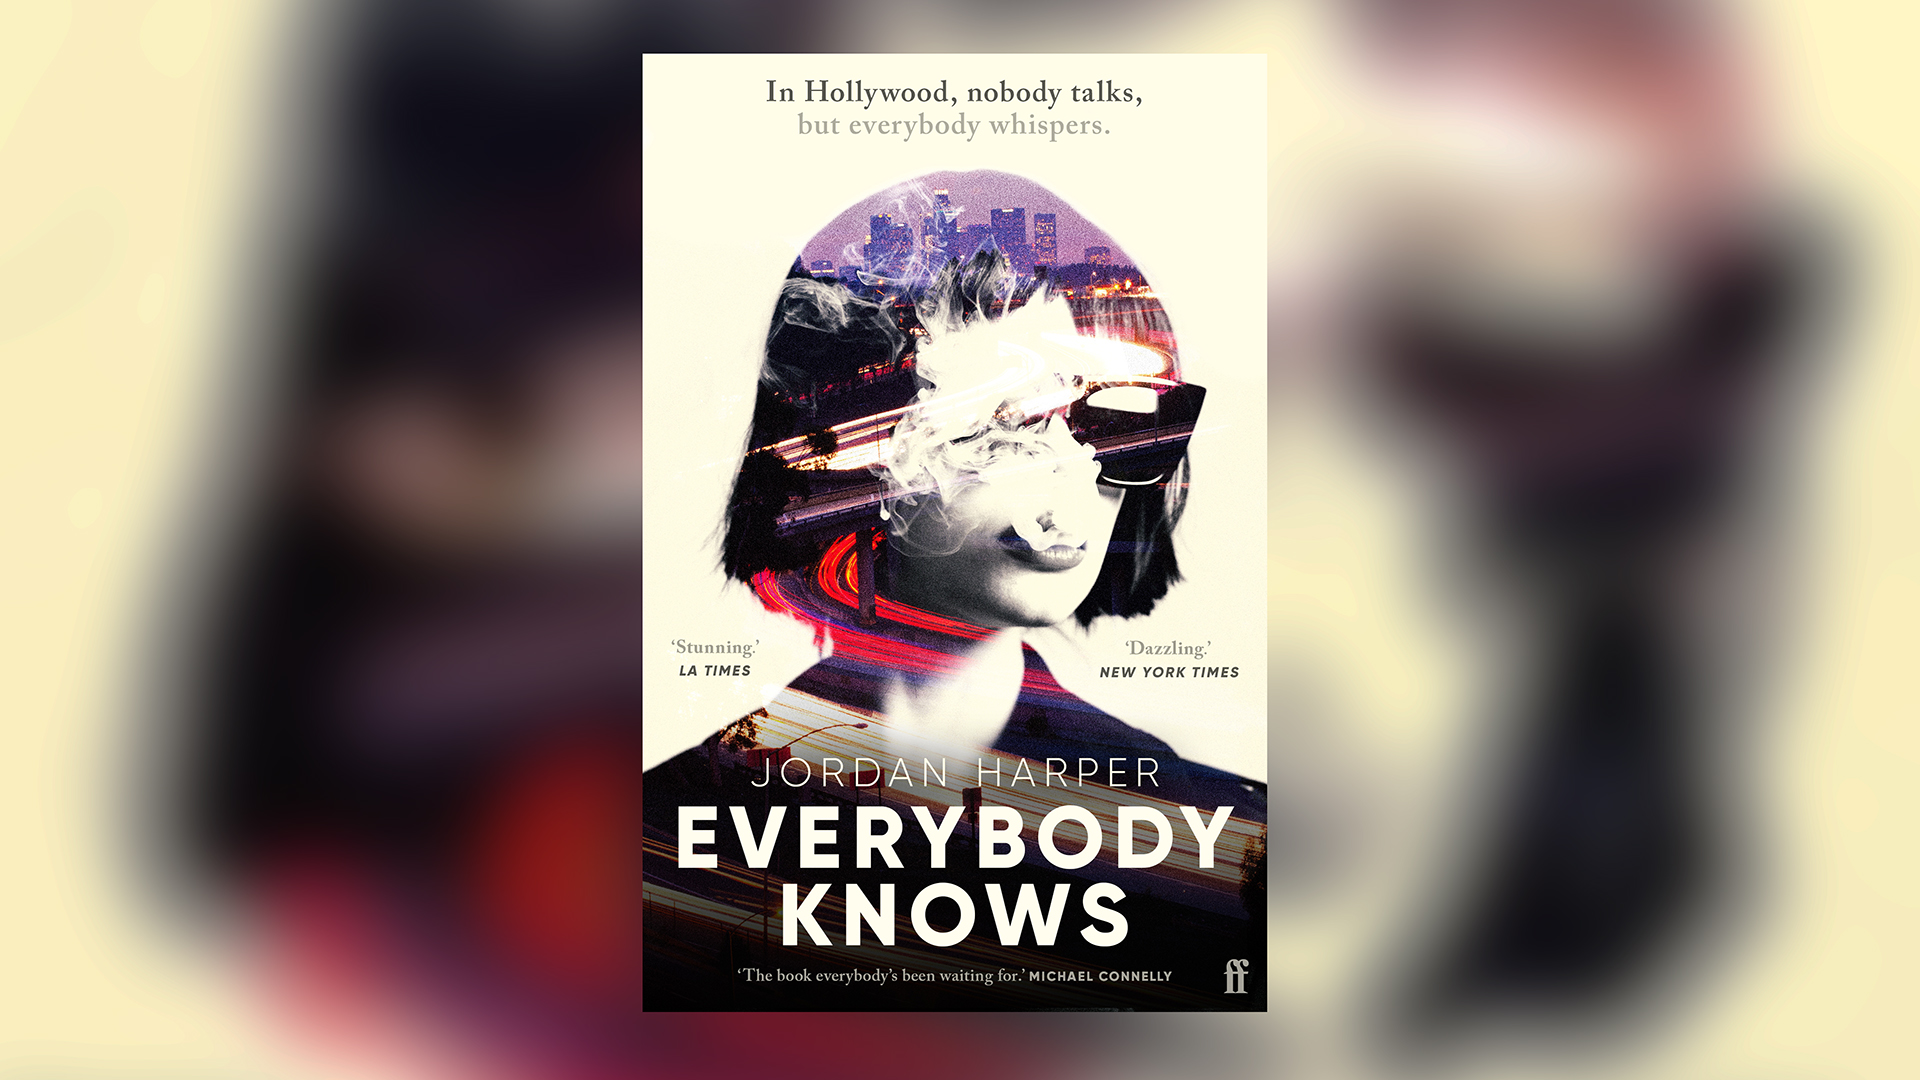 Everybody knows book cover